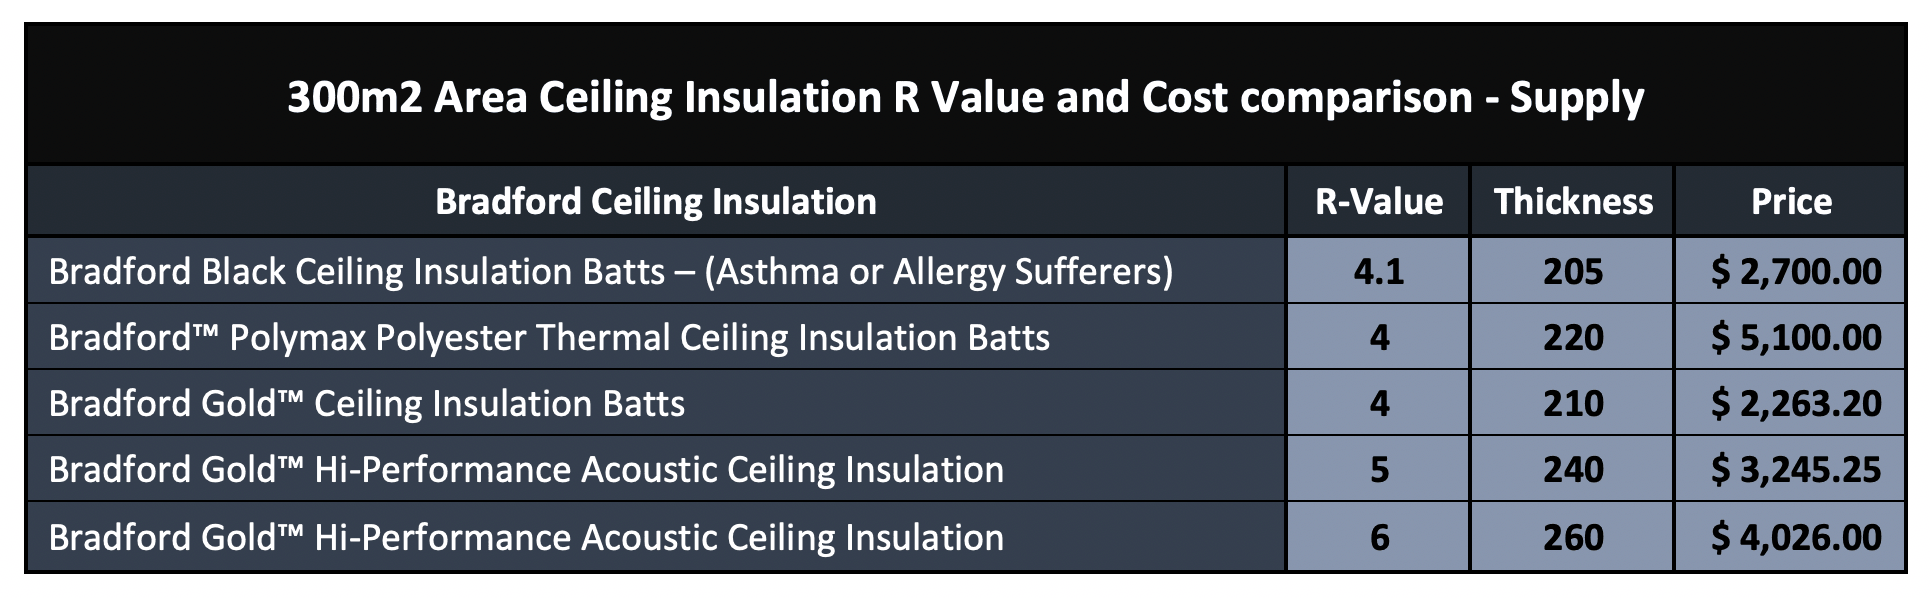 Ceiling insulation cost and R Value comparison